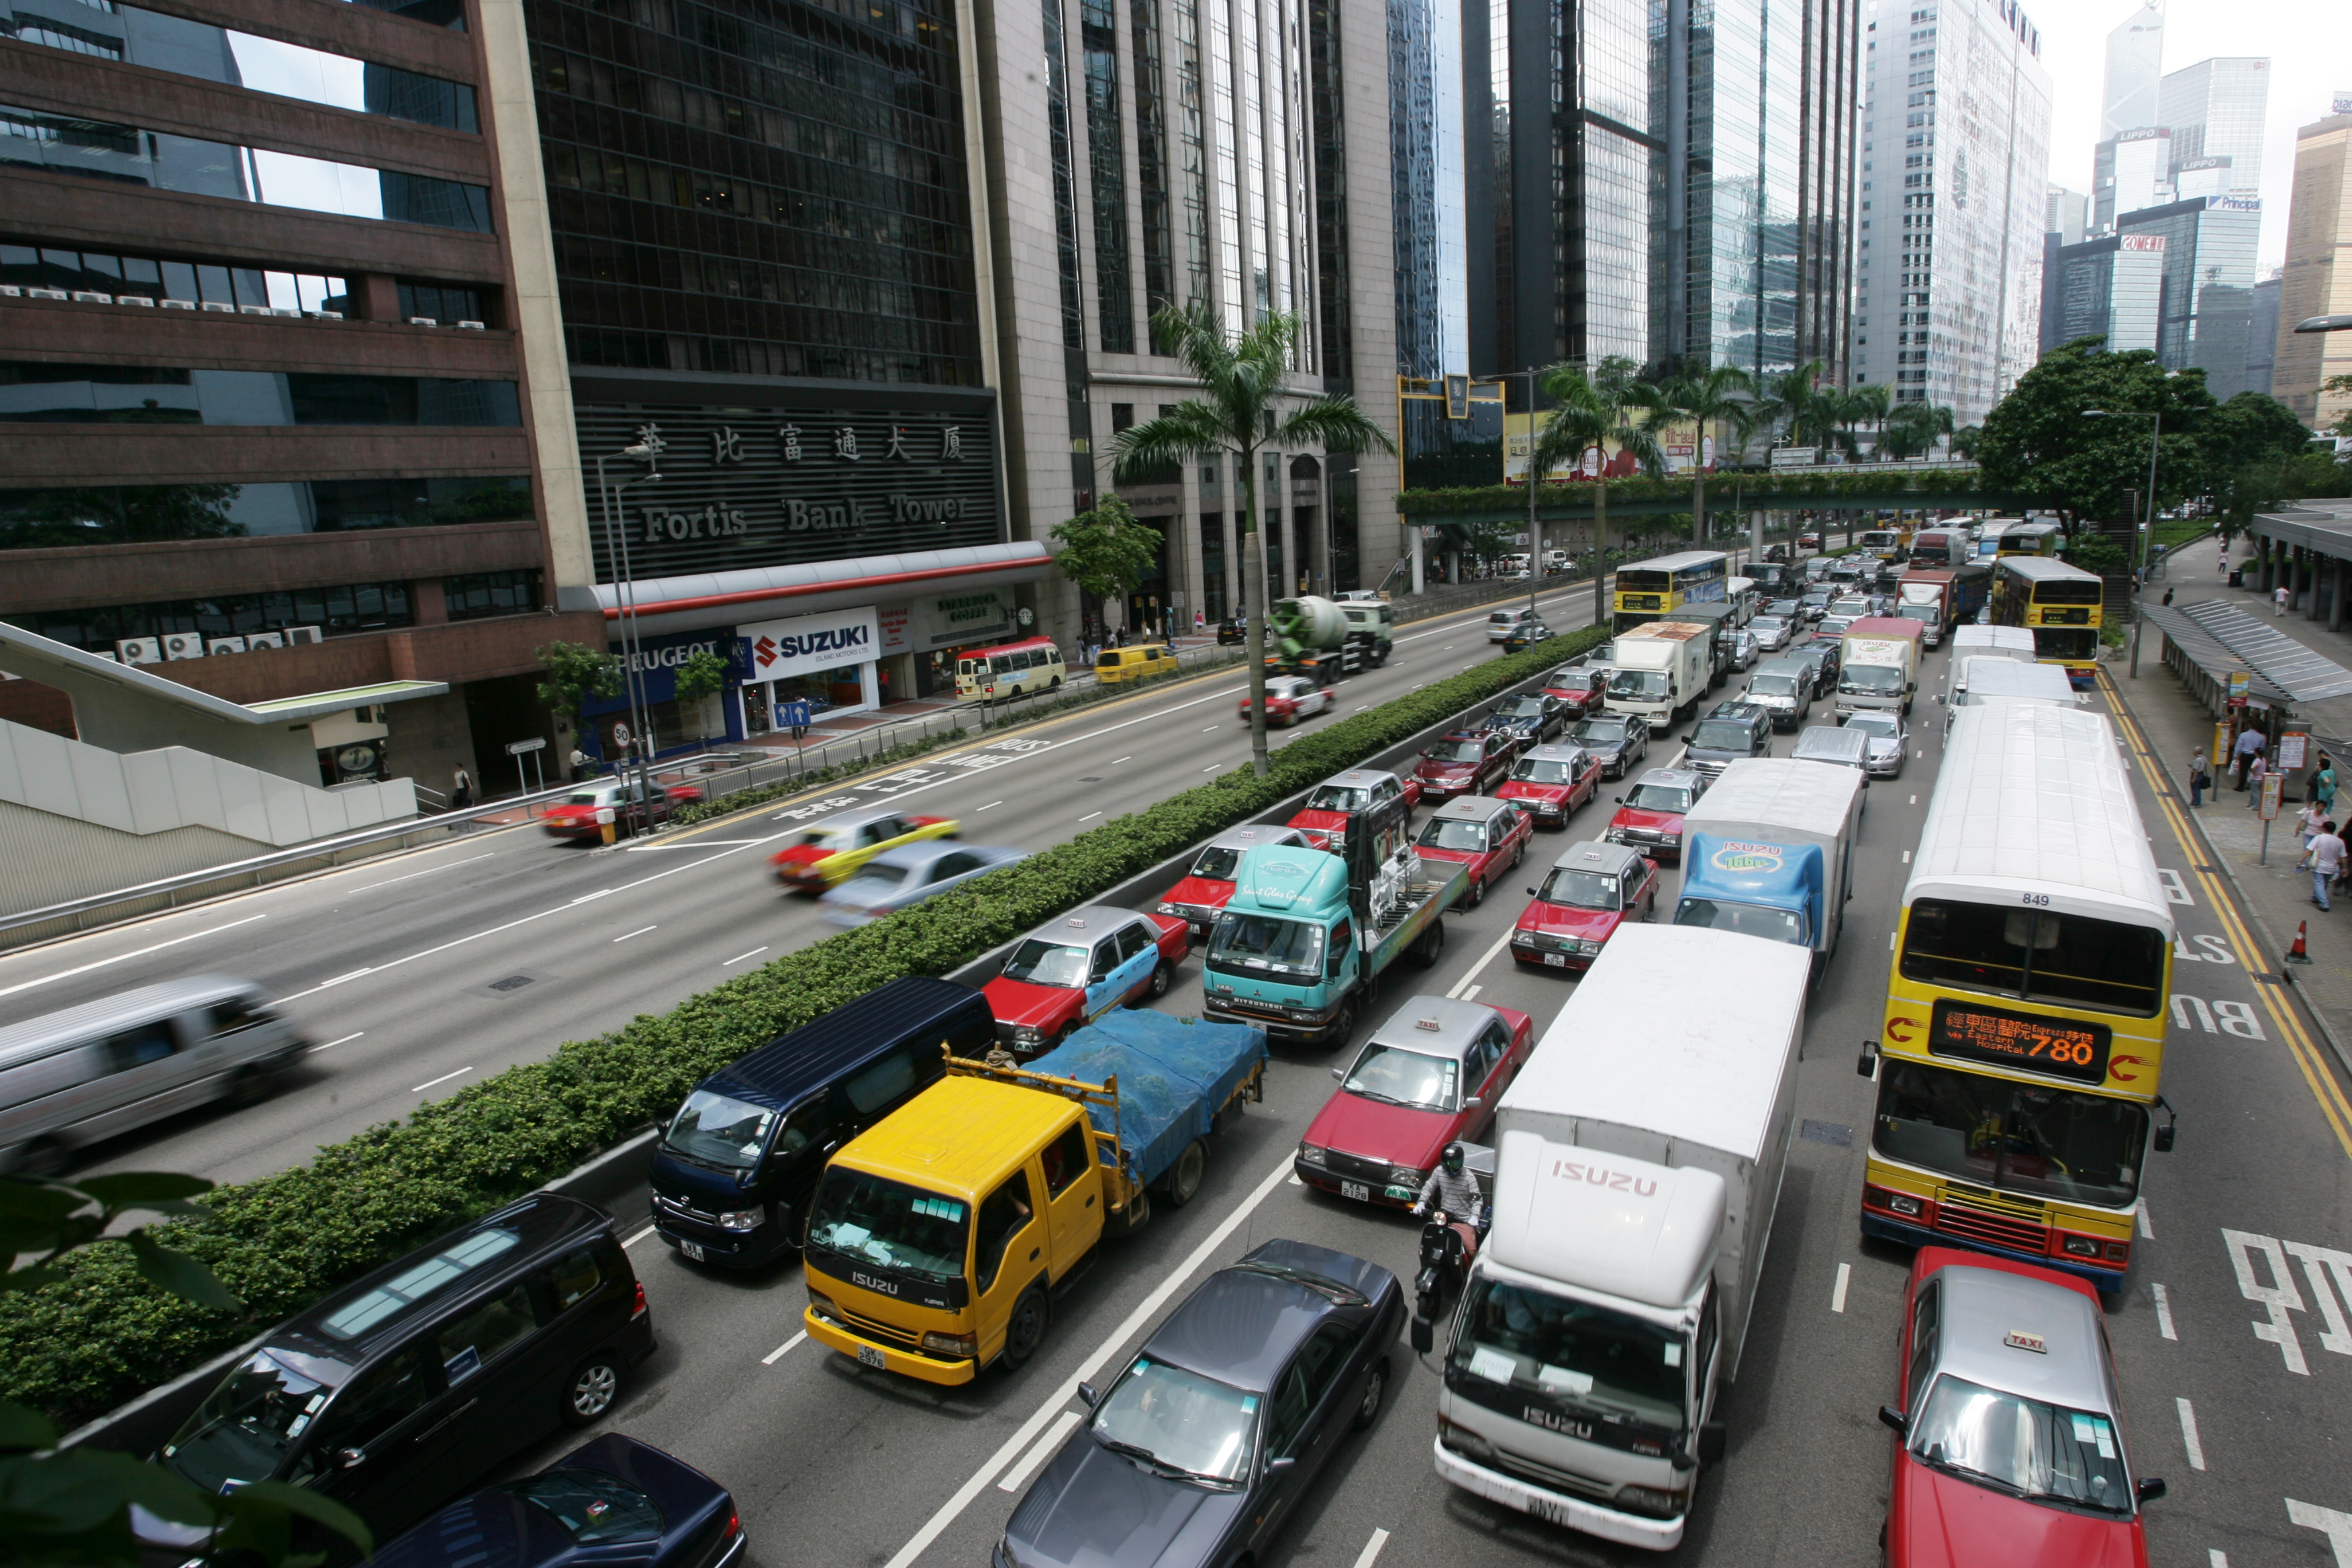 Traffic is heavily congested from Central to Hong Kong Island east after police have closed down part of the Eastern Corridor for firemen to clean up the 100-meter-long oil sludge on Eastern Corridor leaked by a medium-weight truck in the morning. Pictured outside Fortis Bank Tower in Gloucester Road, Wanchai. 18 JULY 2007